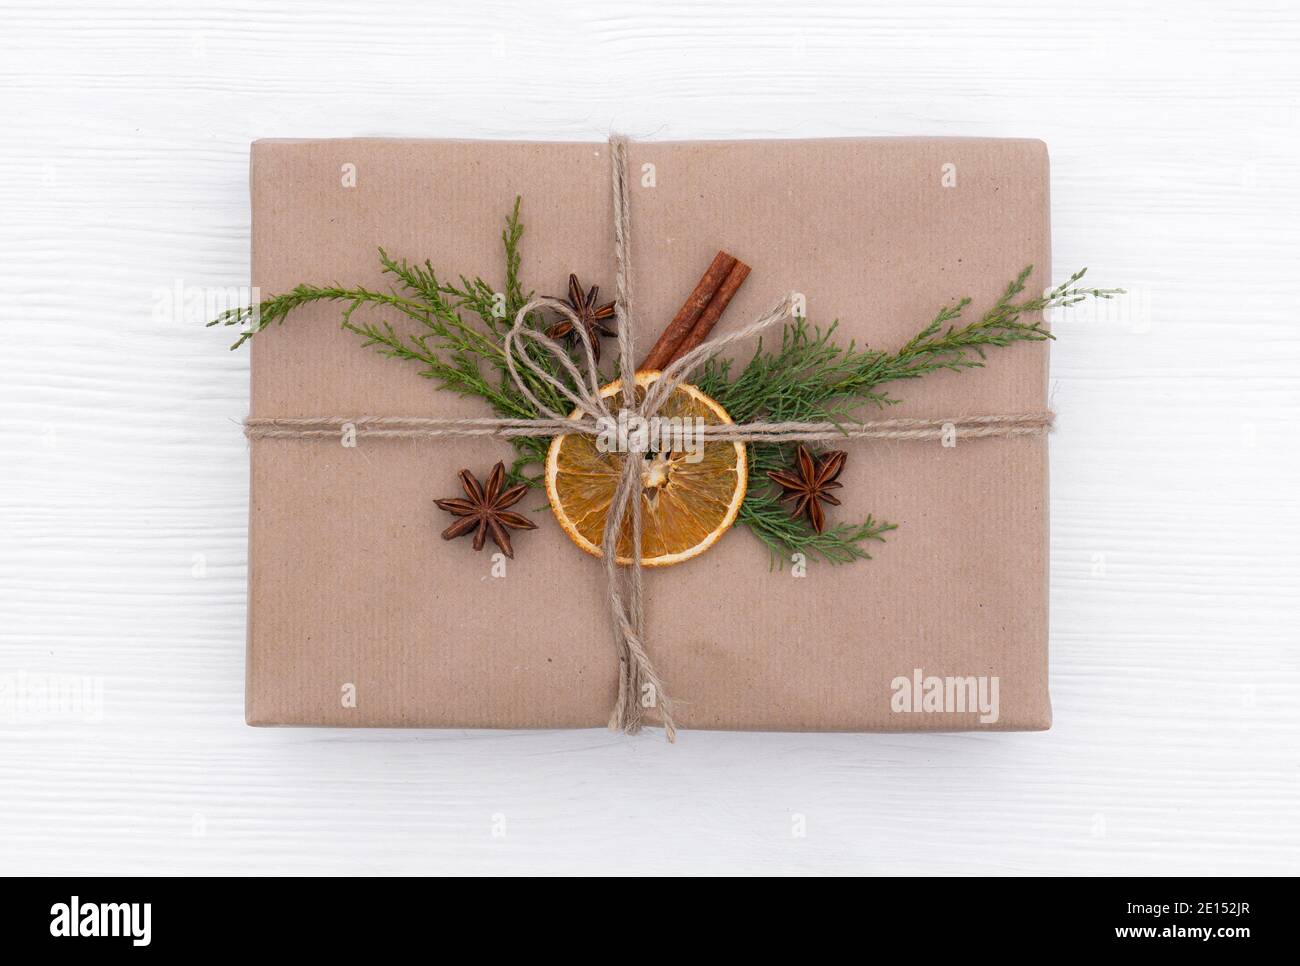 An Original Way Of Wrapping Christmas Gifts Using Craft Paper, Jute Rope,  Spruce Twigs, Oranges And Spices. Top View Of A Beautiful Gift In A  Scandina Stock Photo - Alamy